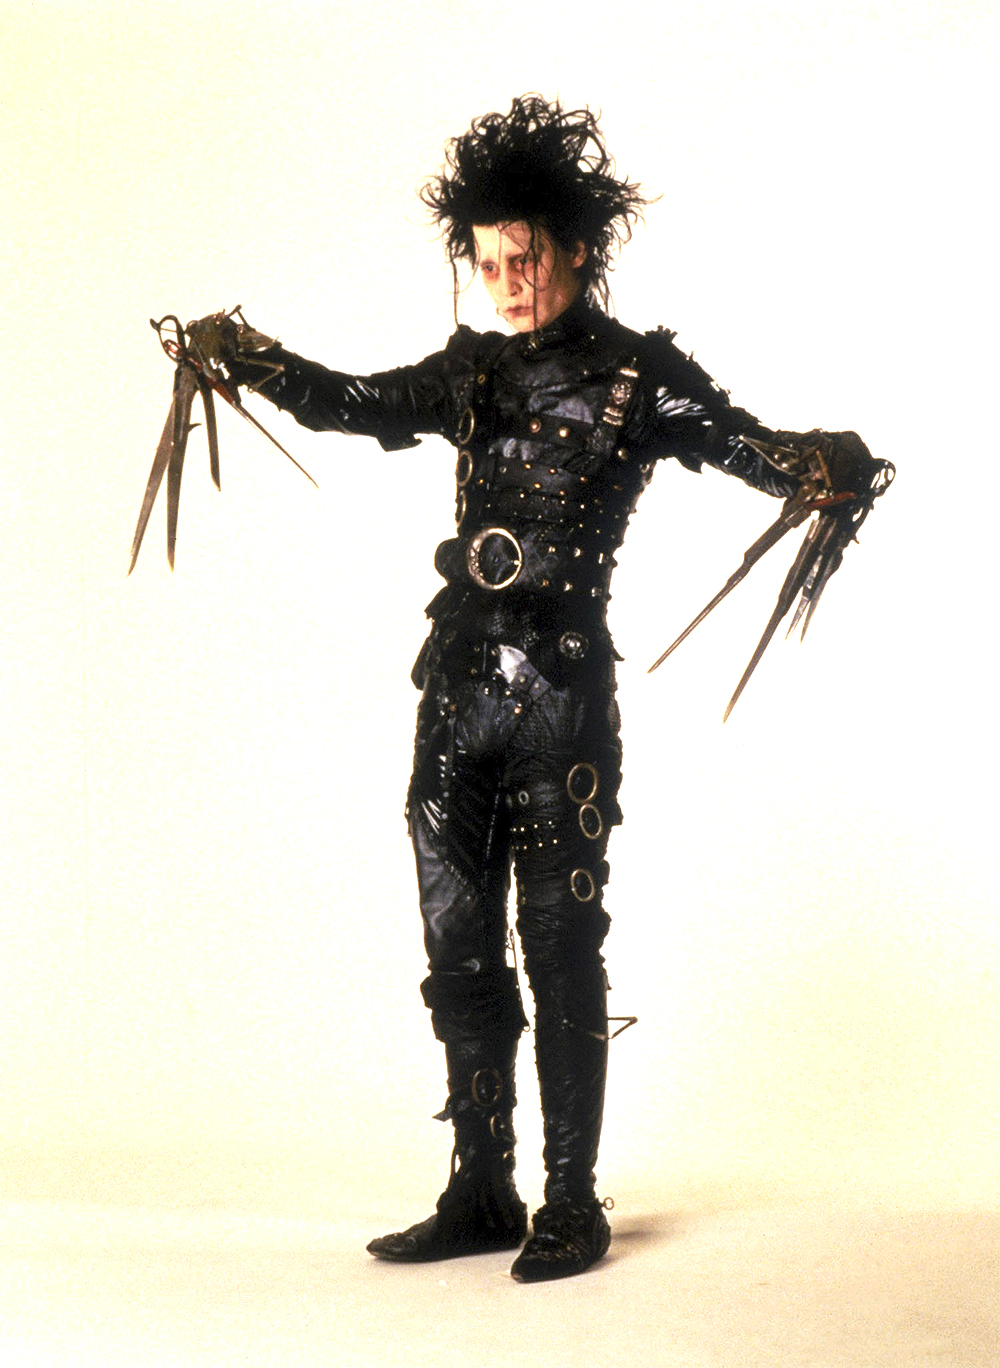 <p>Since ‘Edward Scissorhands,’ Johnny and Tim Burton have worked together on eight more films: 1994’s ‘Ed Wood,’ 1999’s ‘Sleepy Hollow,’ 2005’s ‘Charlie and the Chocolate Factory’ and ‘Corpse Bride,’ 2007’s ‘Sweeny Todd,’ 2010’s ‘Alice In Wonderland’ (and its 2016 sequel, ‘Alice Through The Looking Glass’), and 2012’s ‘Dark Shadows.’</p>